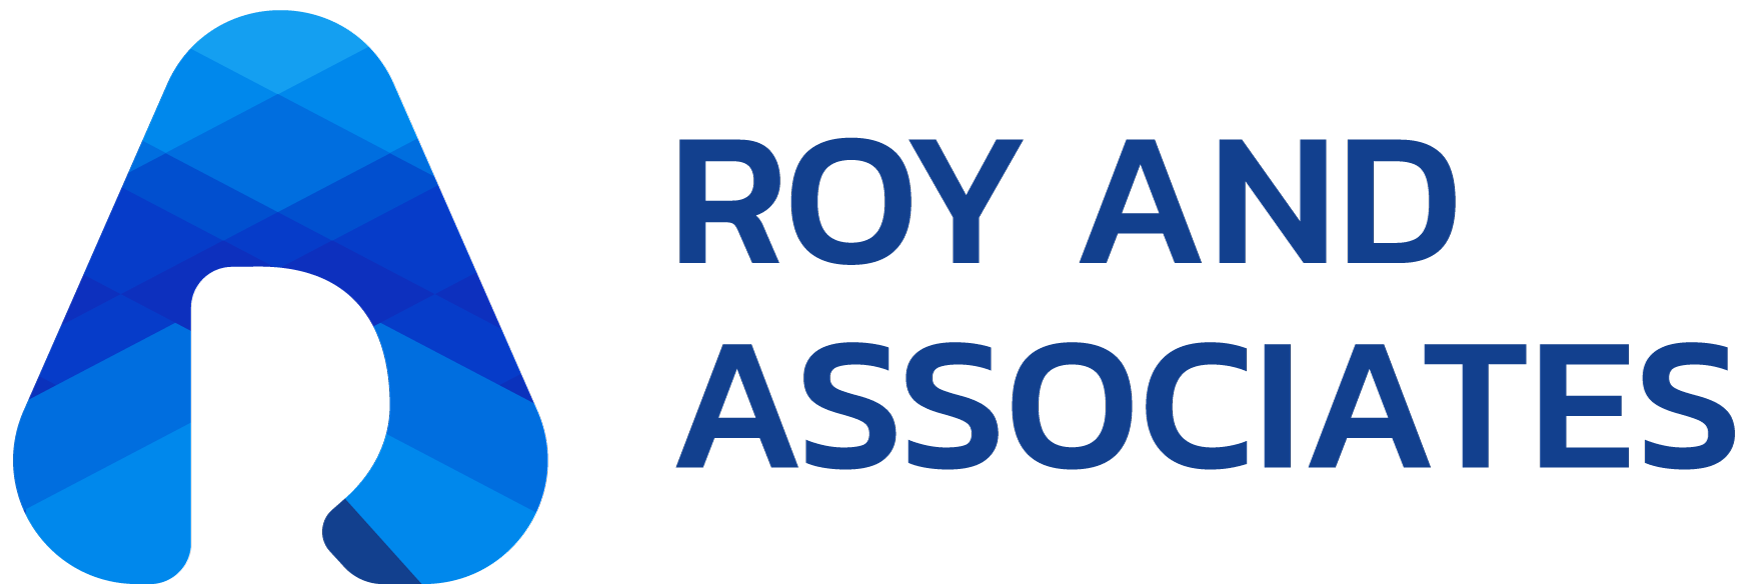 Roy-and-Associates-1